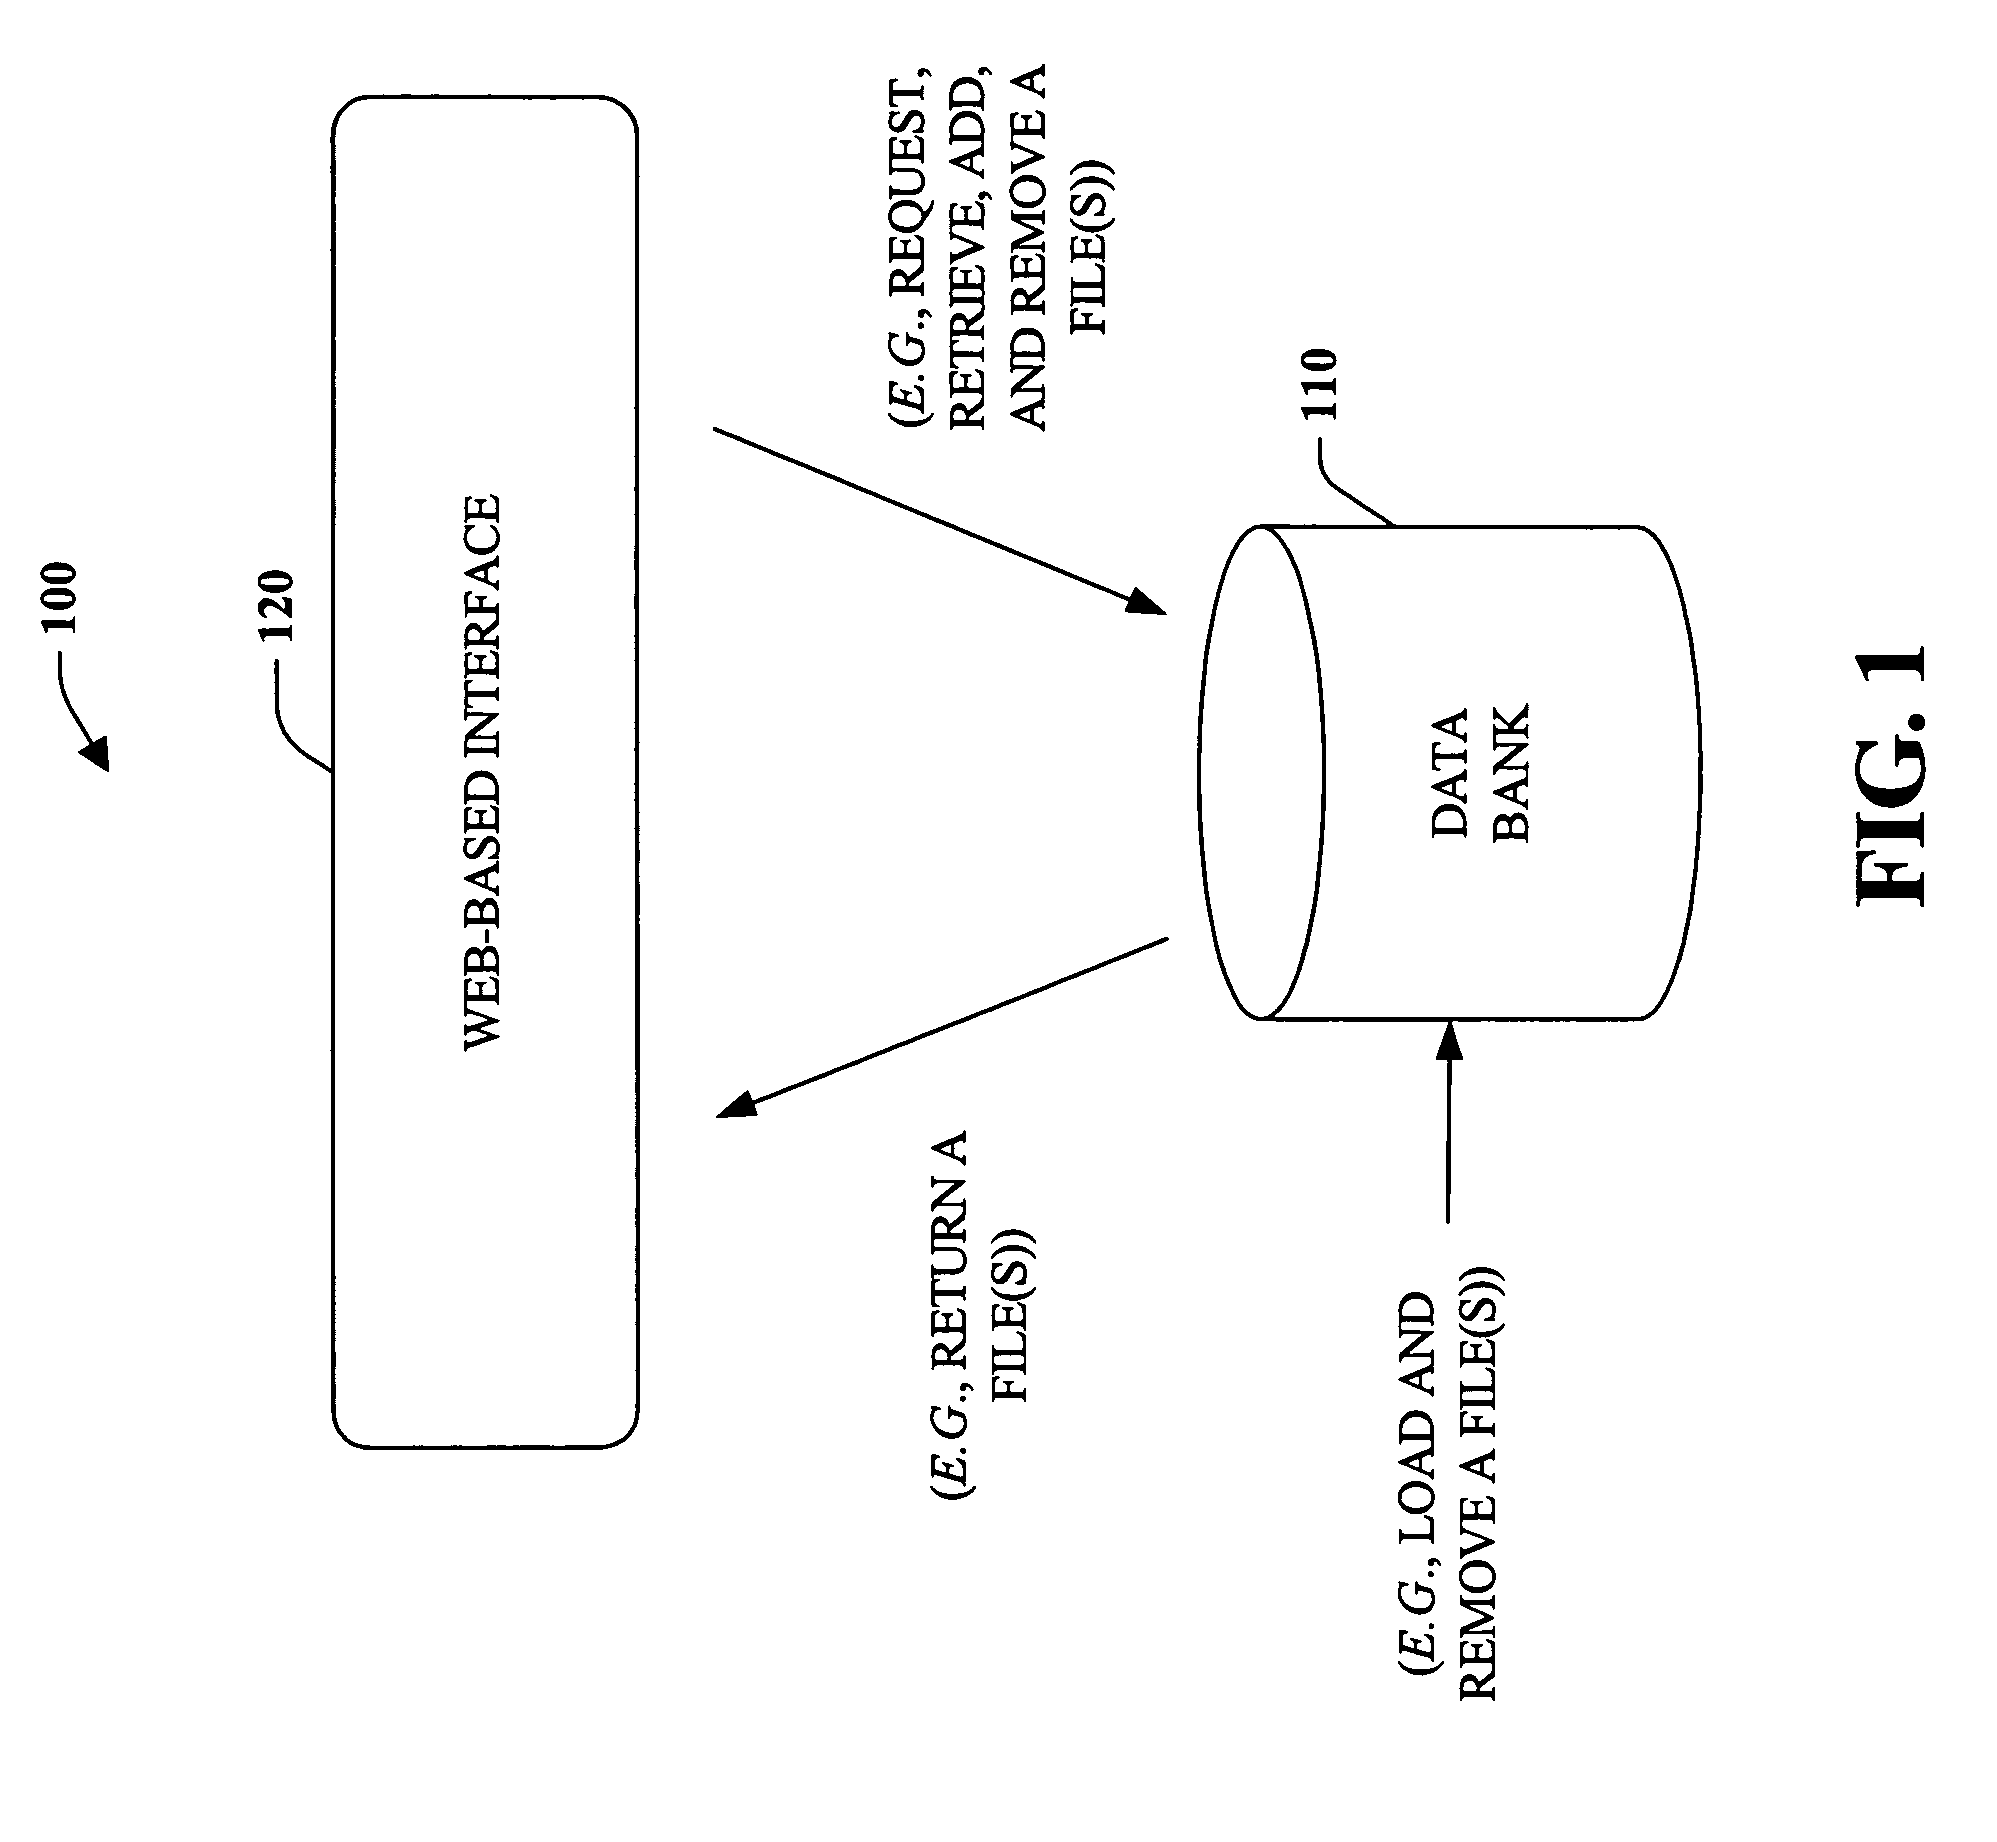 Systems and methods that utilize scalable vector graphics to provide web-based visualization of a device